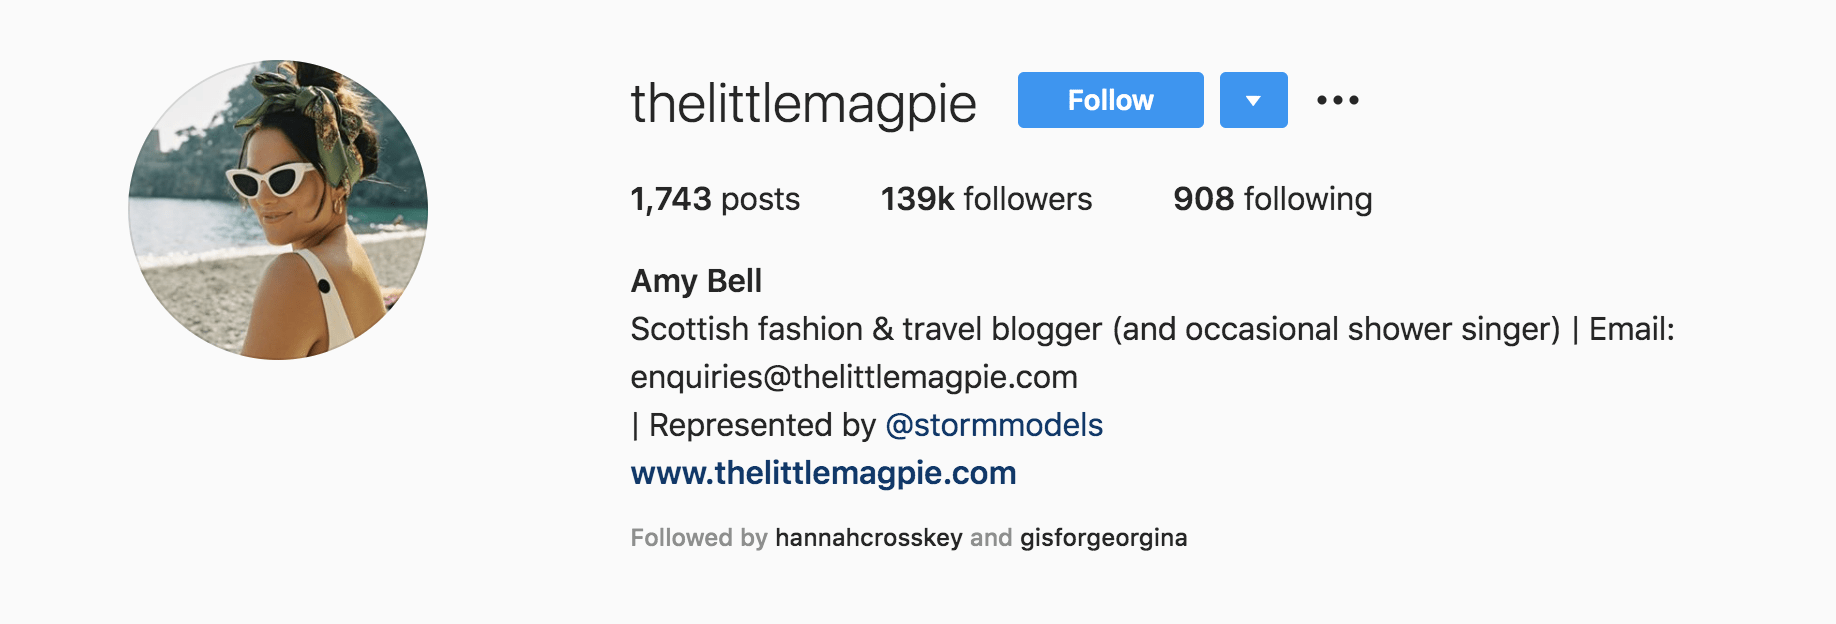 Top Fashion Influencers - Amy Bell